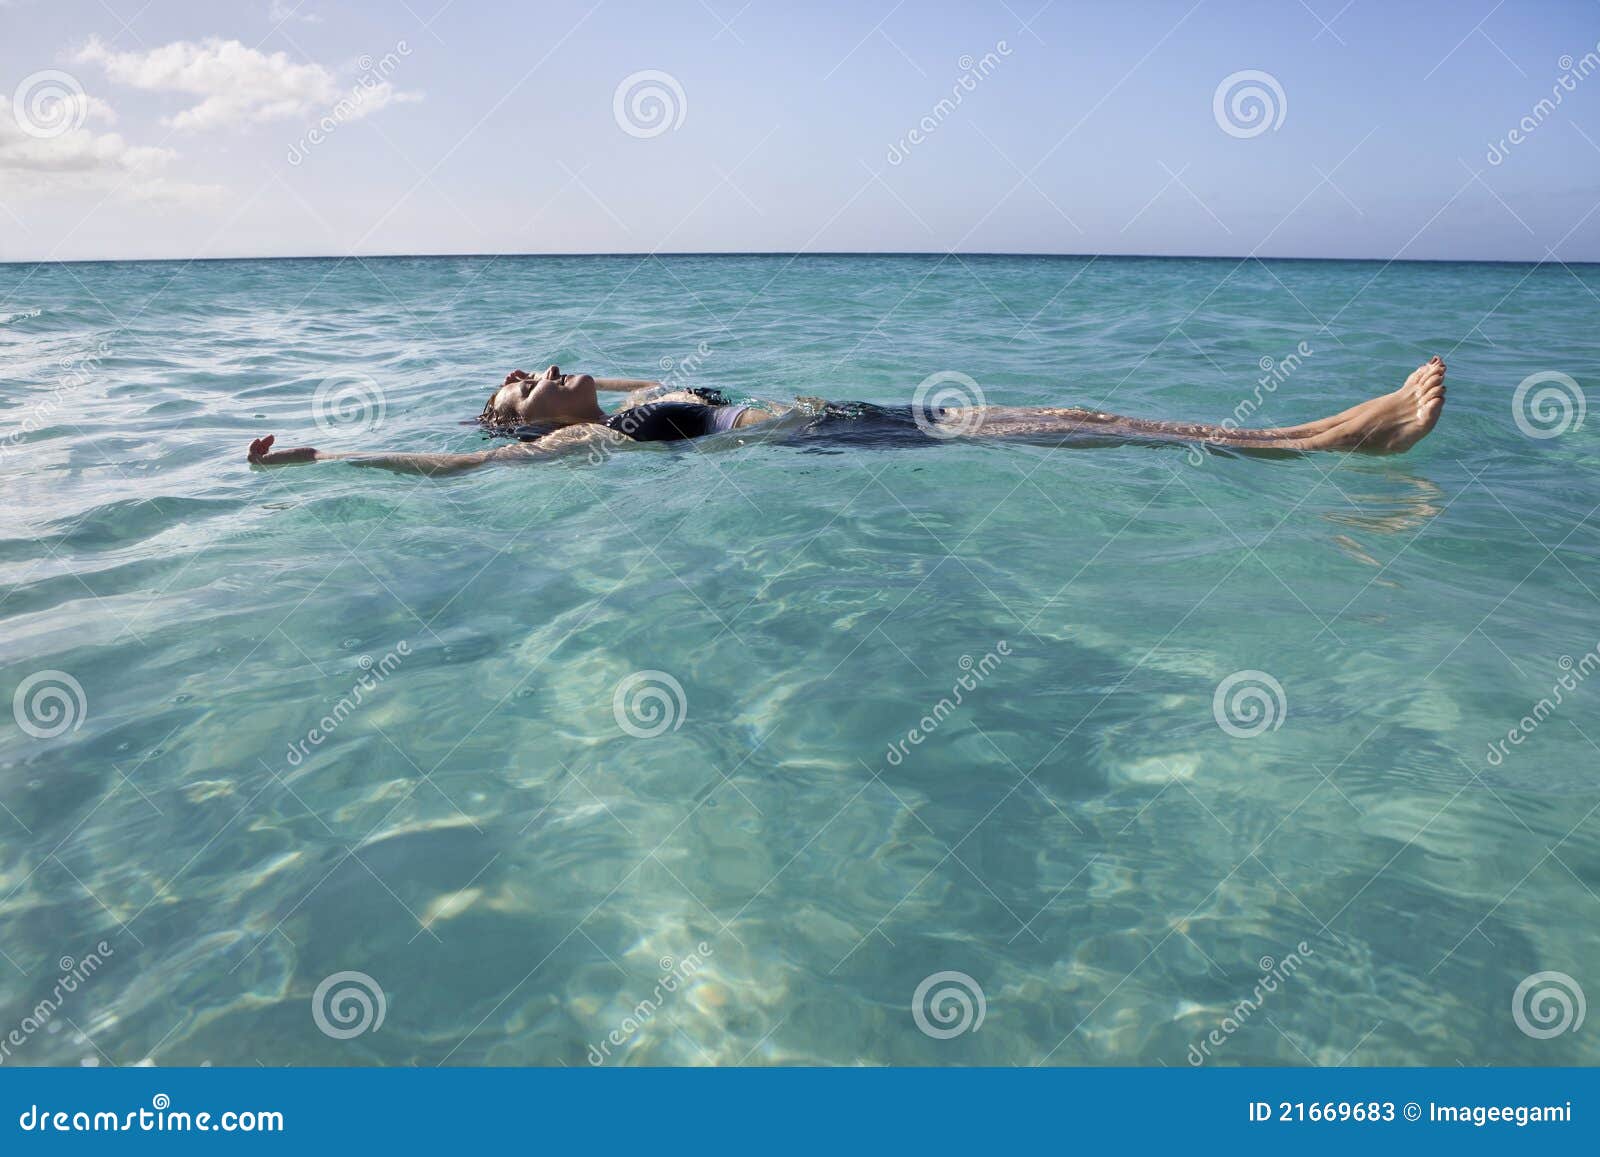 woman floating and relaxing in the sea